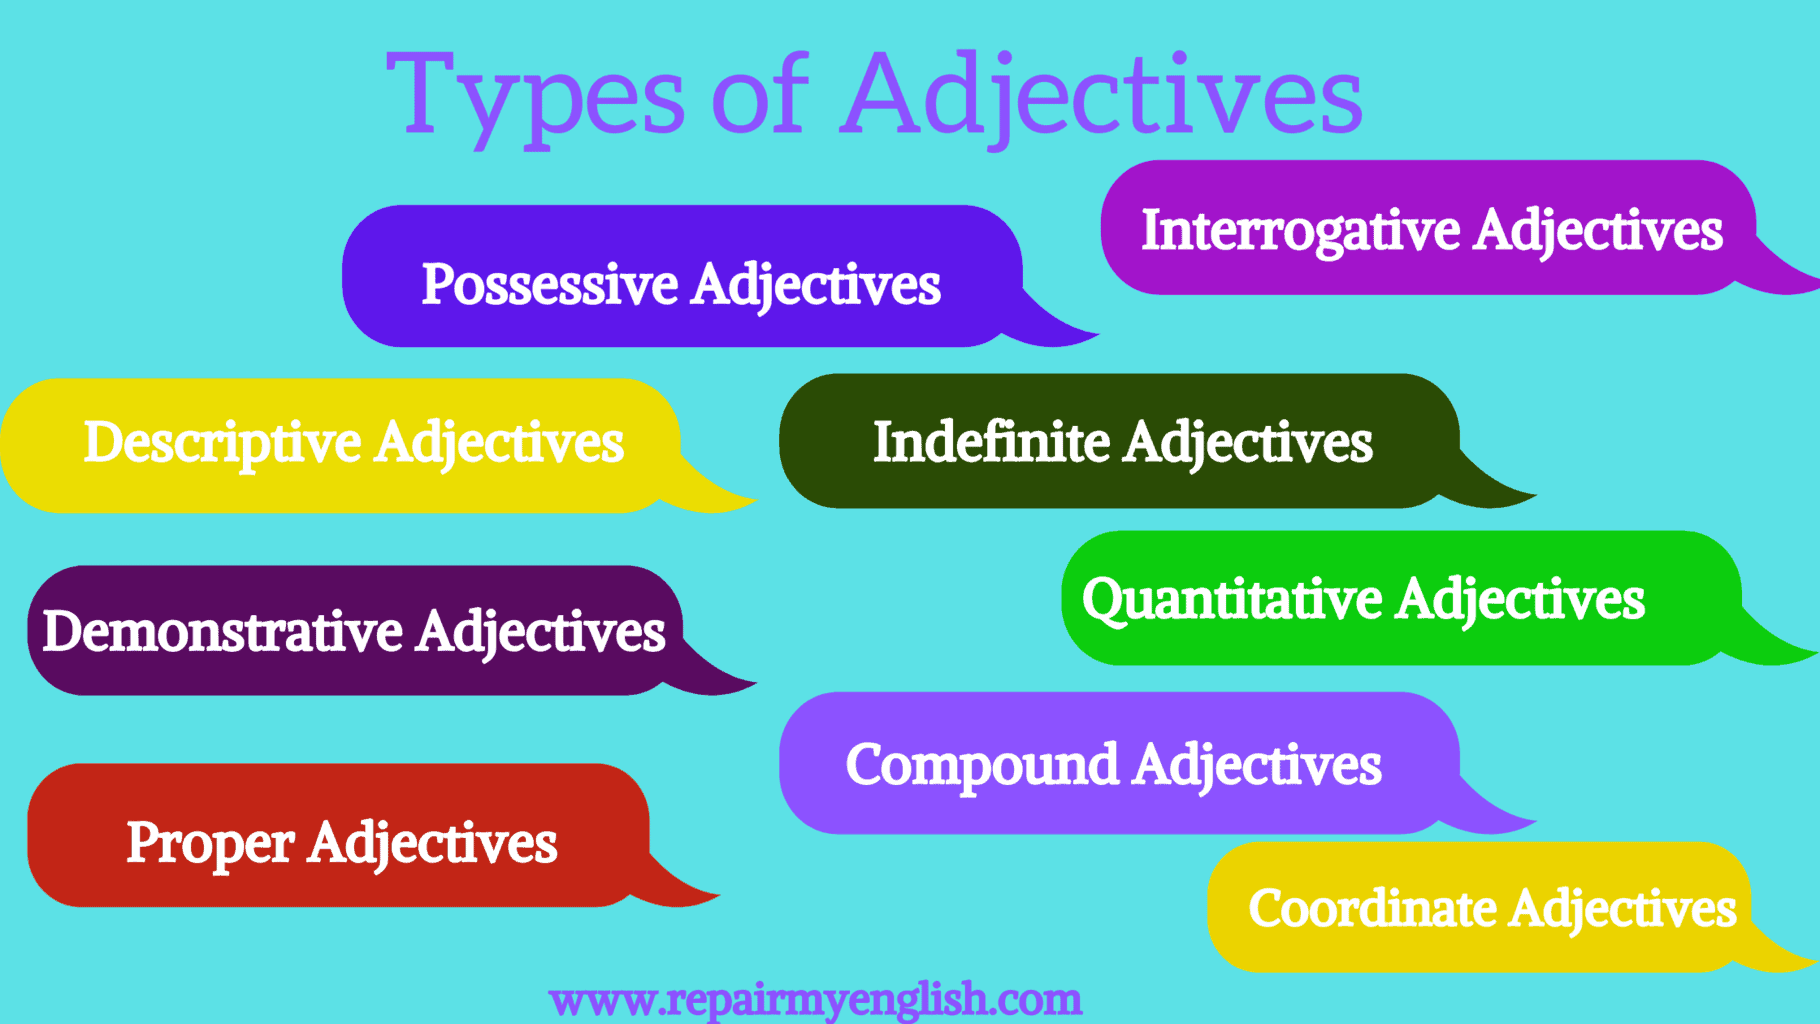 definition-of-adjectives-types-of-adjectives-the-ultimate-guide